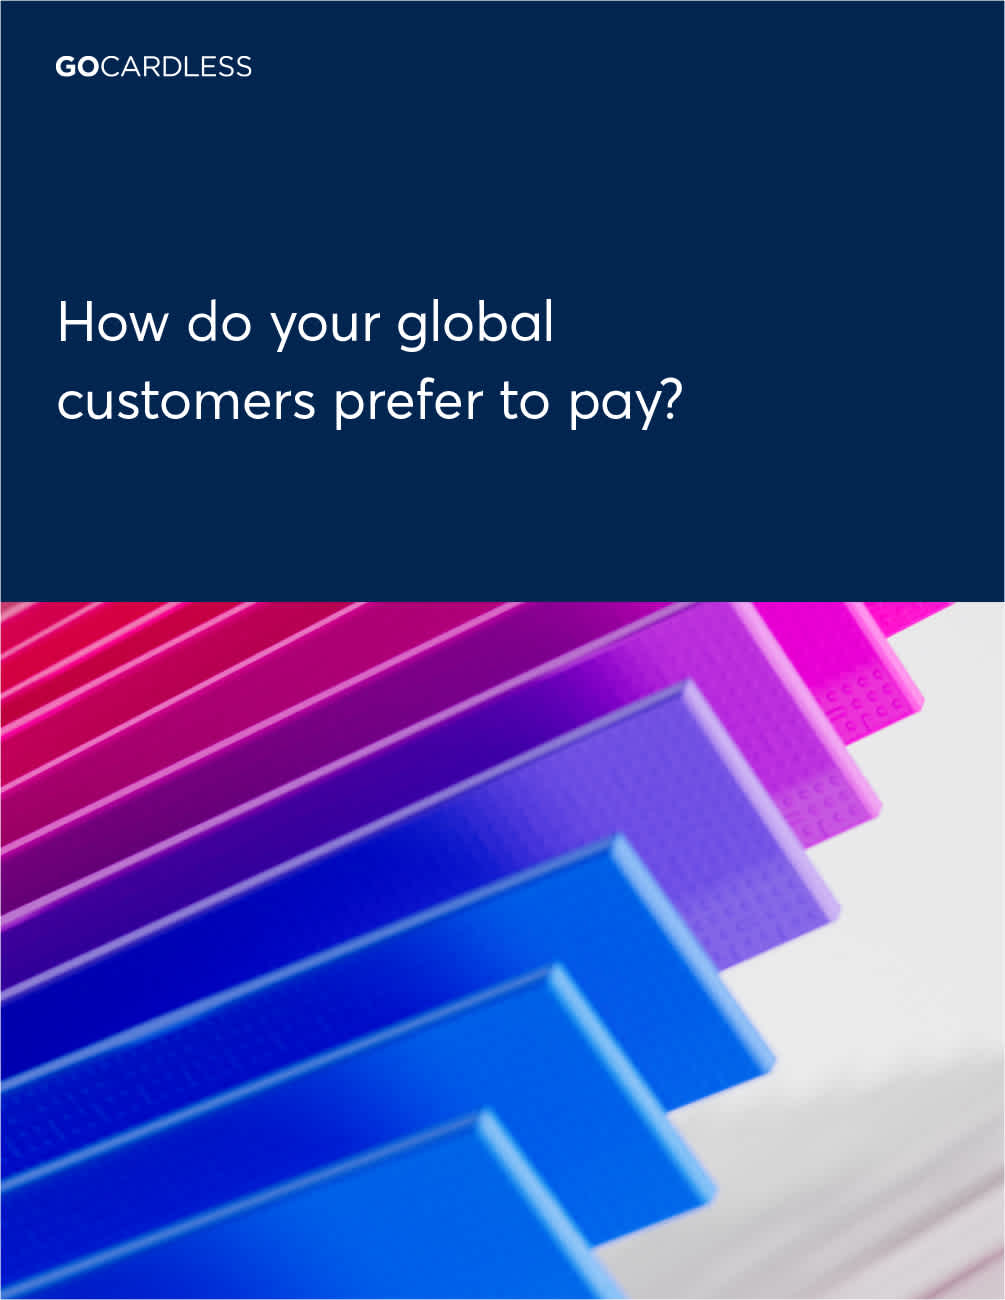 Leverage your customers’ payment preferences